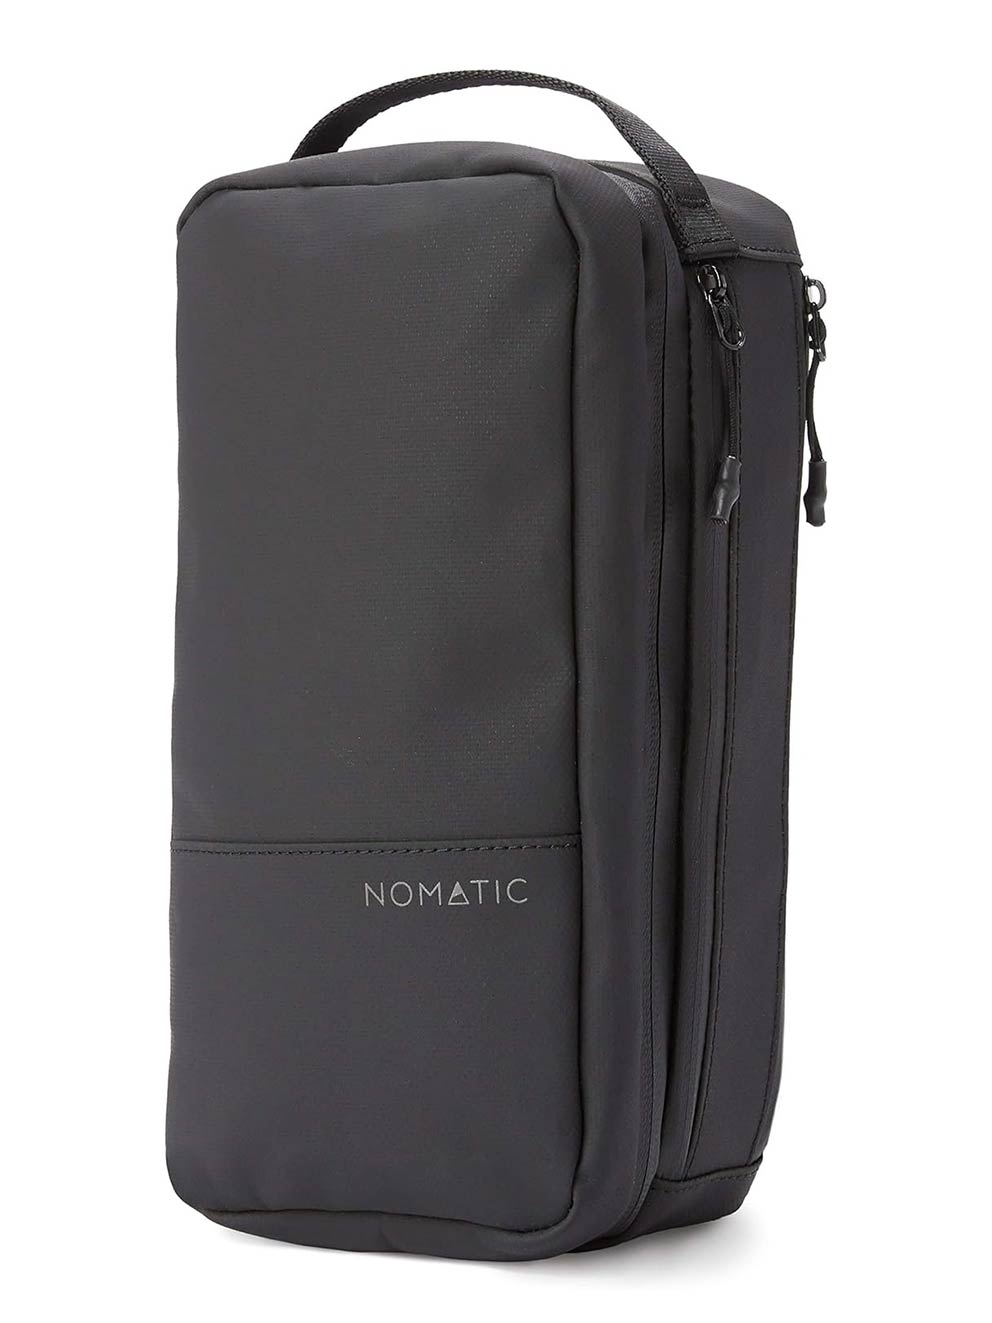 NOMATIC Water Resistant Toiltetry & Cosmetic Travel Bag